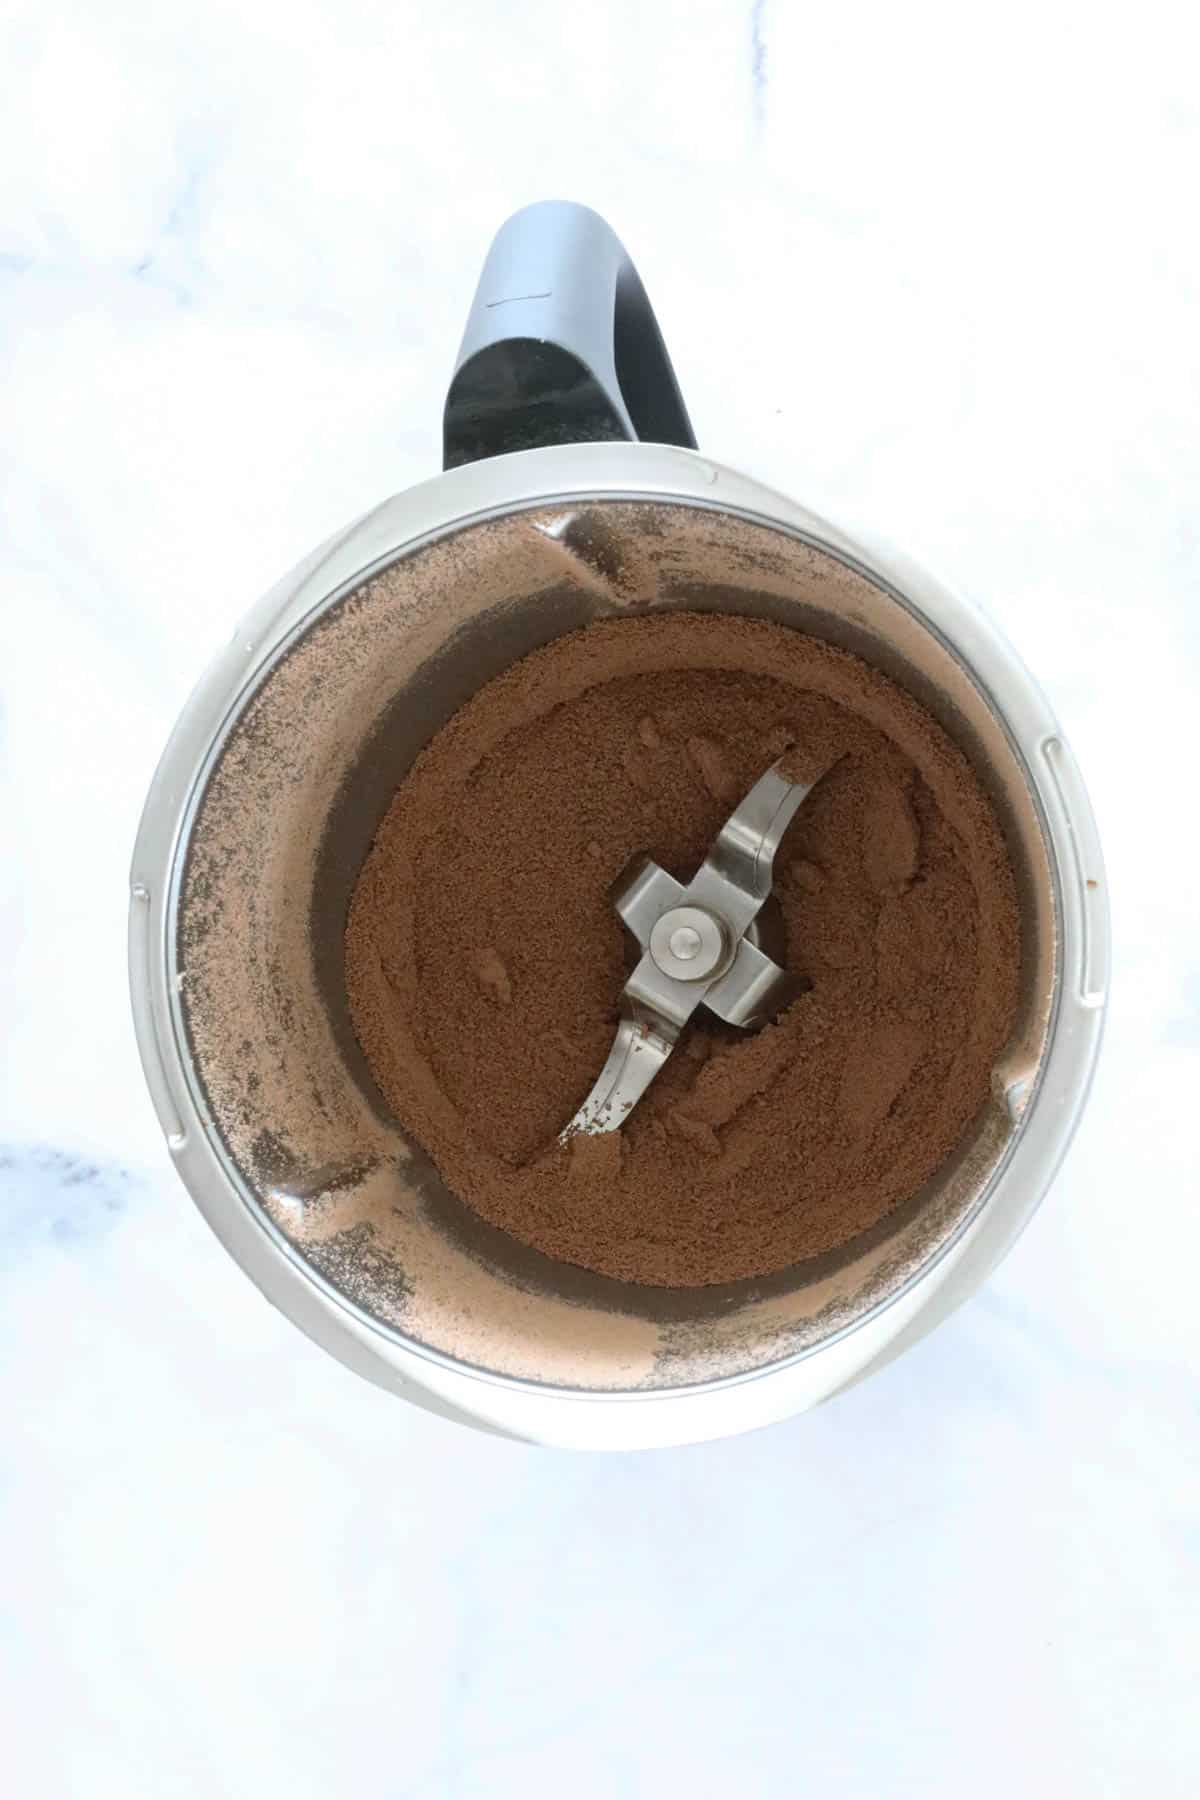 An overhead shot of a jug with grated chocolate.